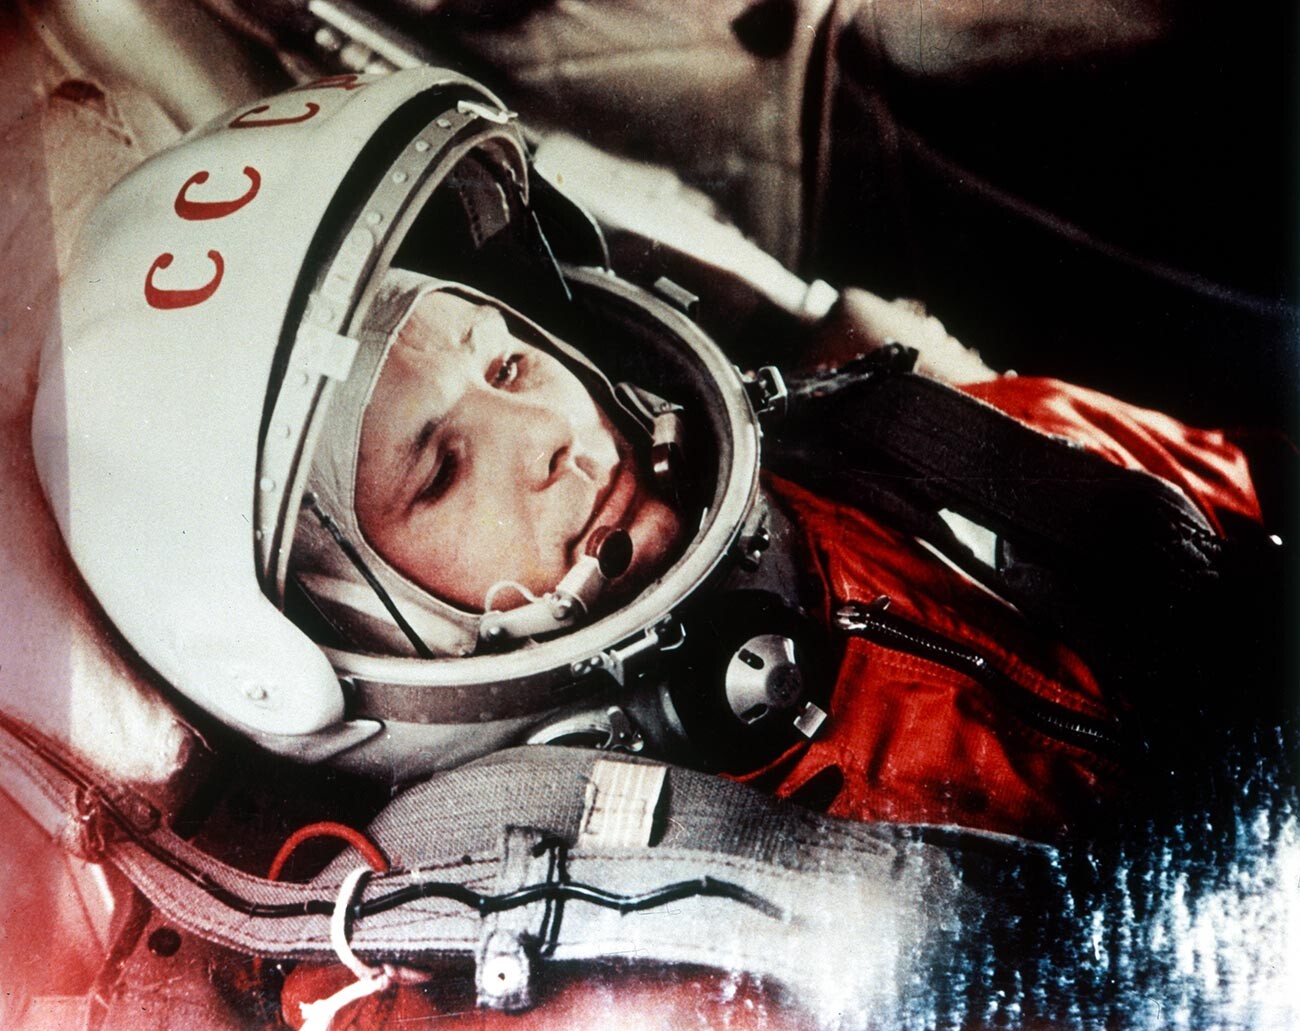 Yury Gagarin, the first man in space